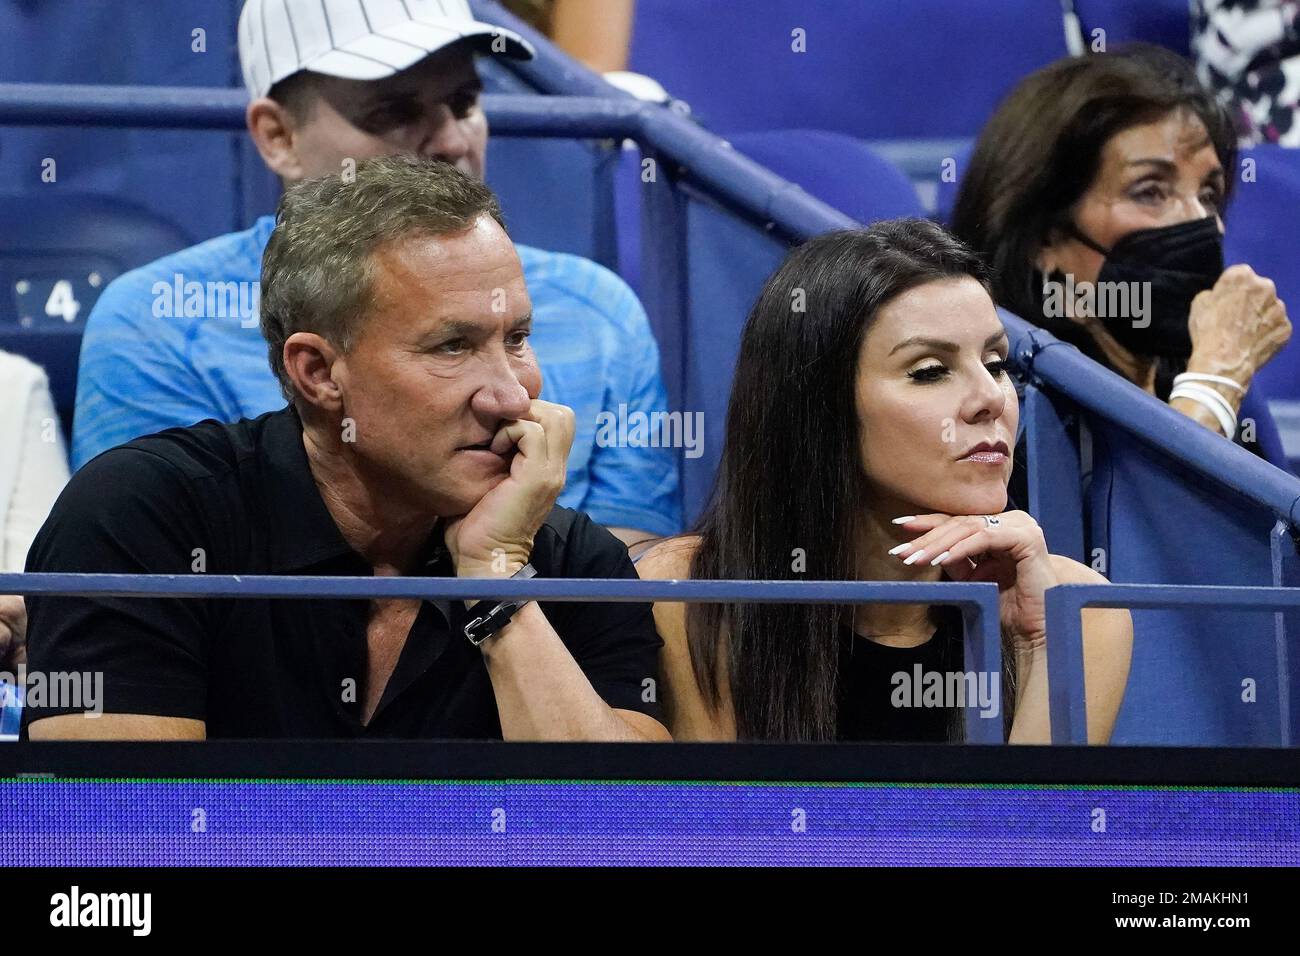 Terry Dubrow, left, and Heather Dubrow, watch play between Carlos Alcaraz, of Spain, and Frances Tiafoe, of the United States, during the semifinals of the U.S